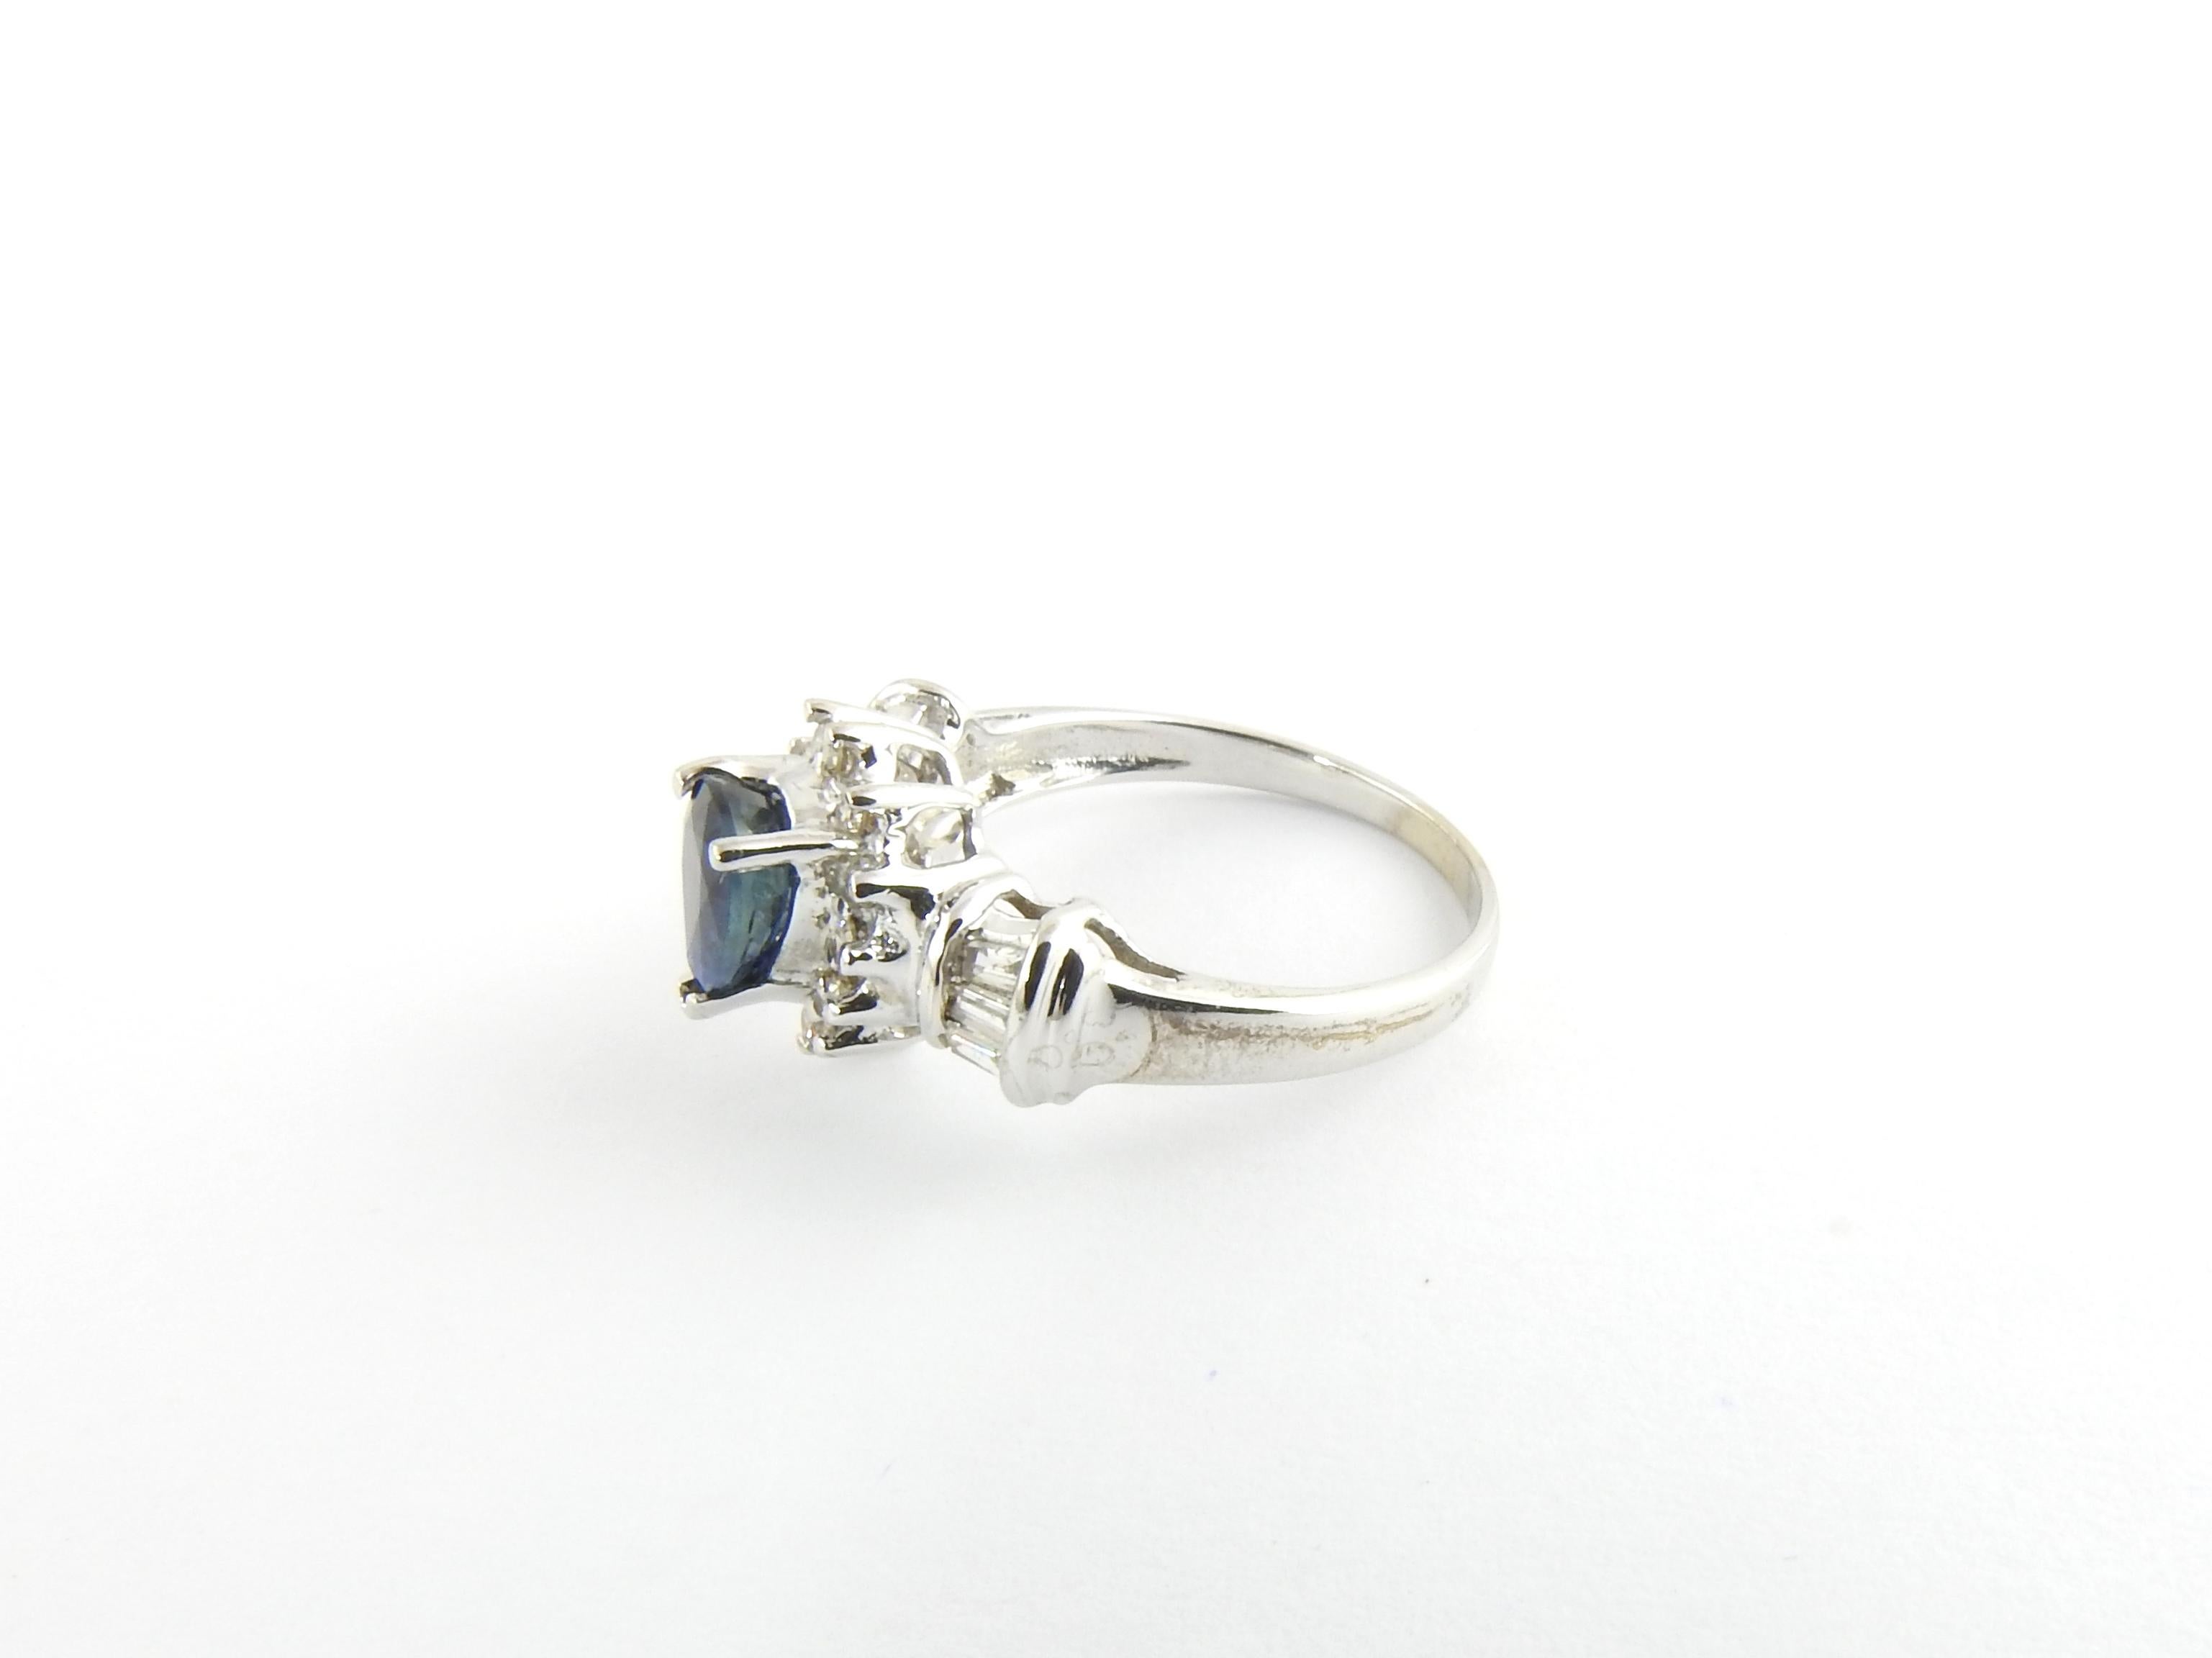 Vintage 14 Karat White Gold Sapphire and Diamond Ring Size 6.5

This lovely ring features one pear shaped sapphire (8 mm x 6 mm), 12 round brilliant cut diamonds and six baguette diamonds set in classic 14K white gold. Shank: 2 mm.

Approximate